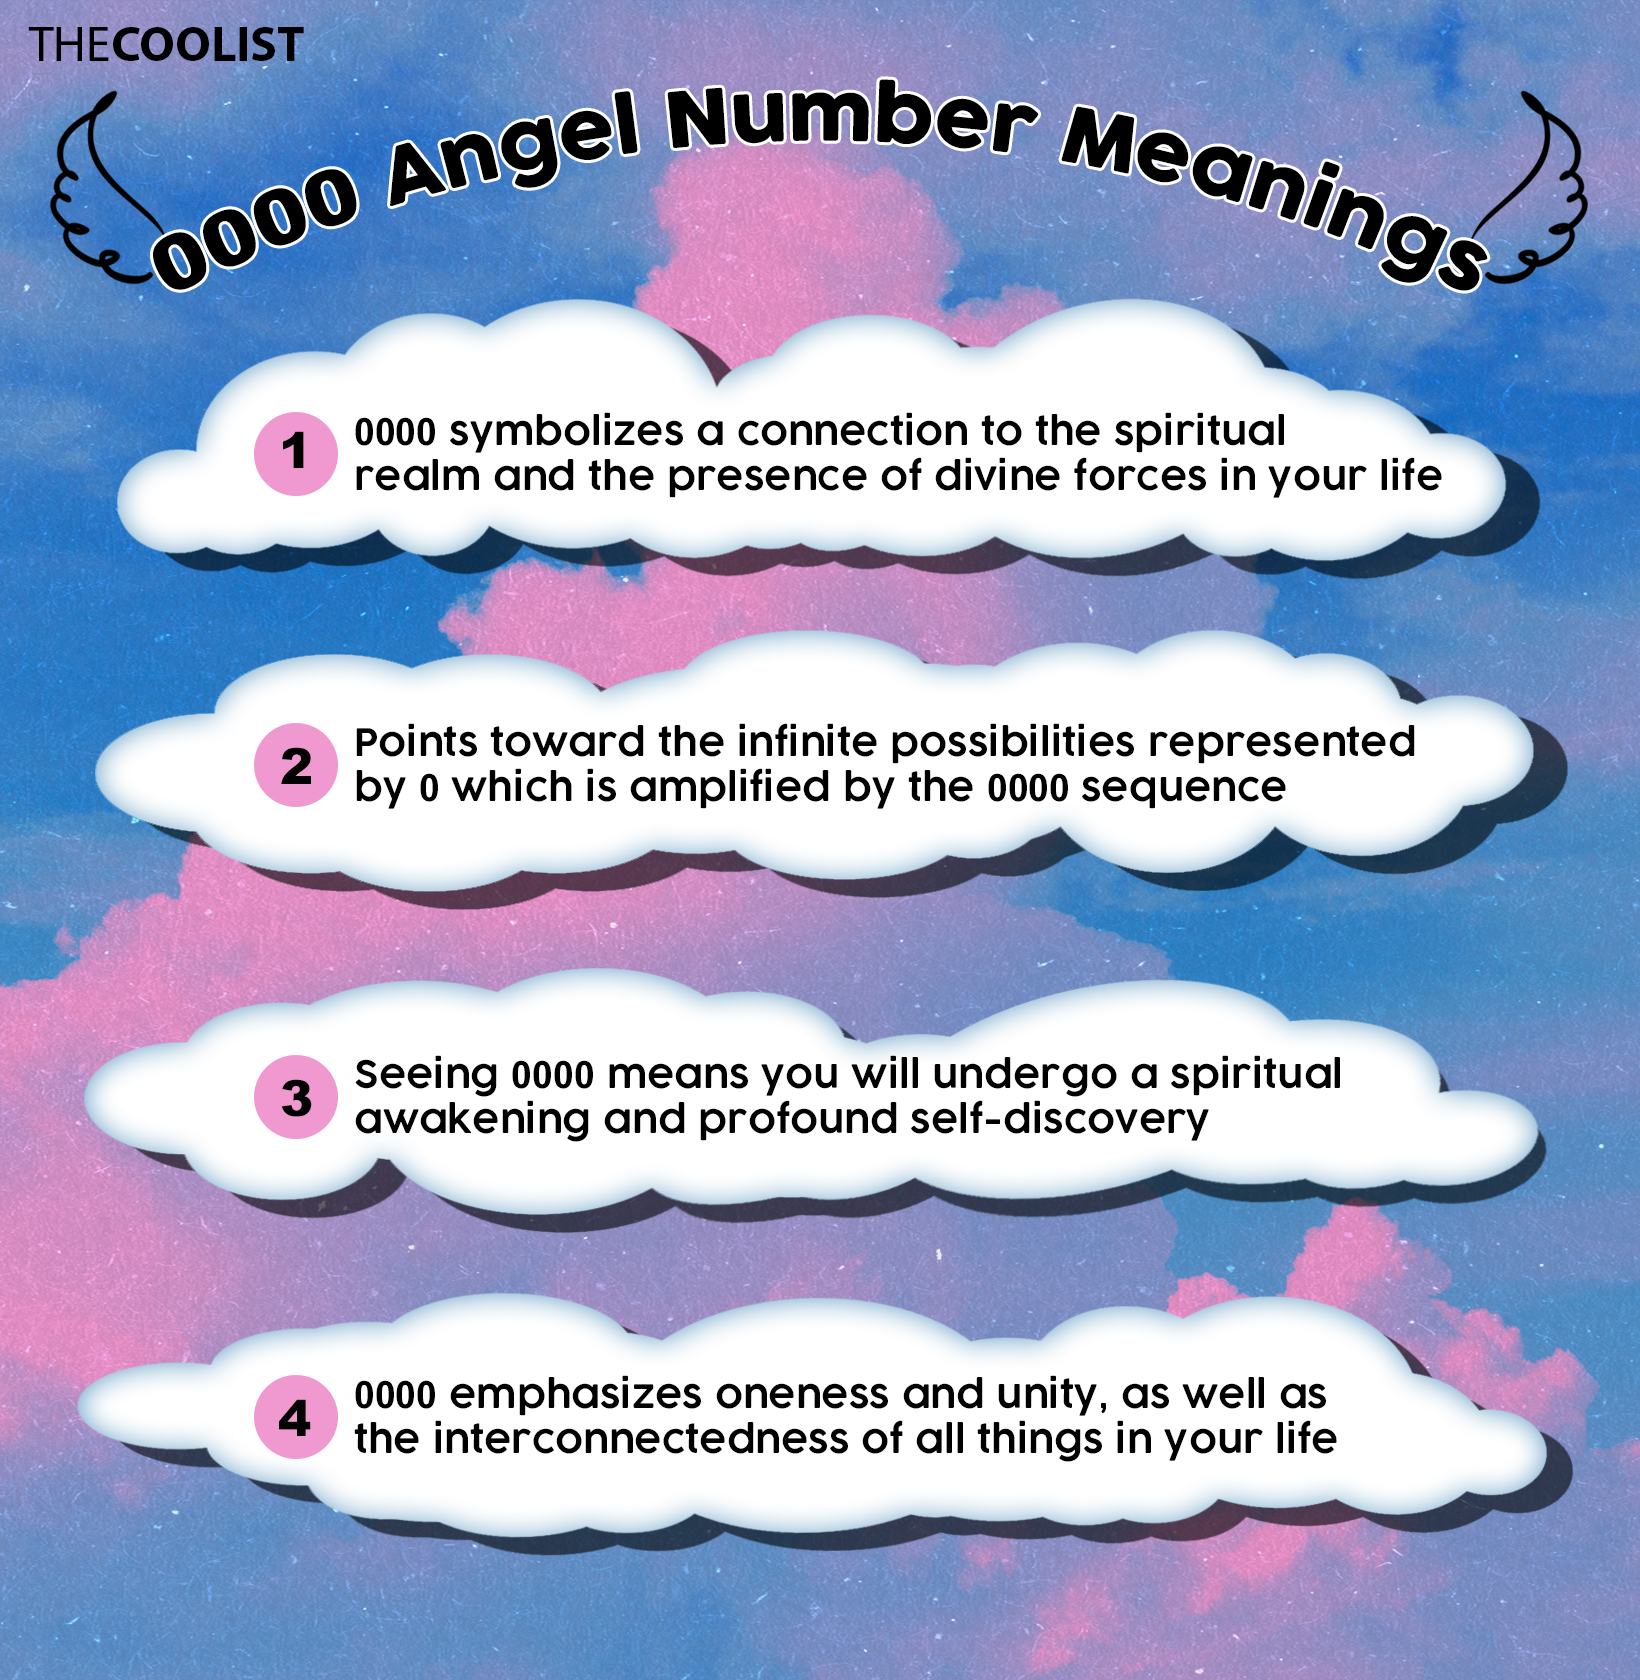 Infographic of 0000 angel number